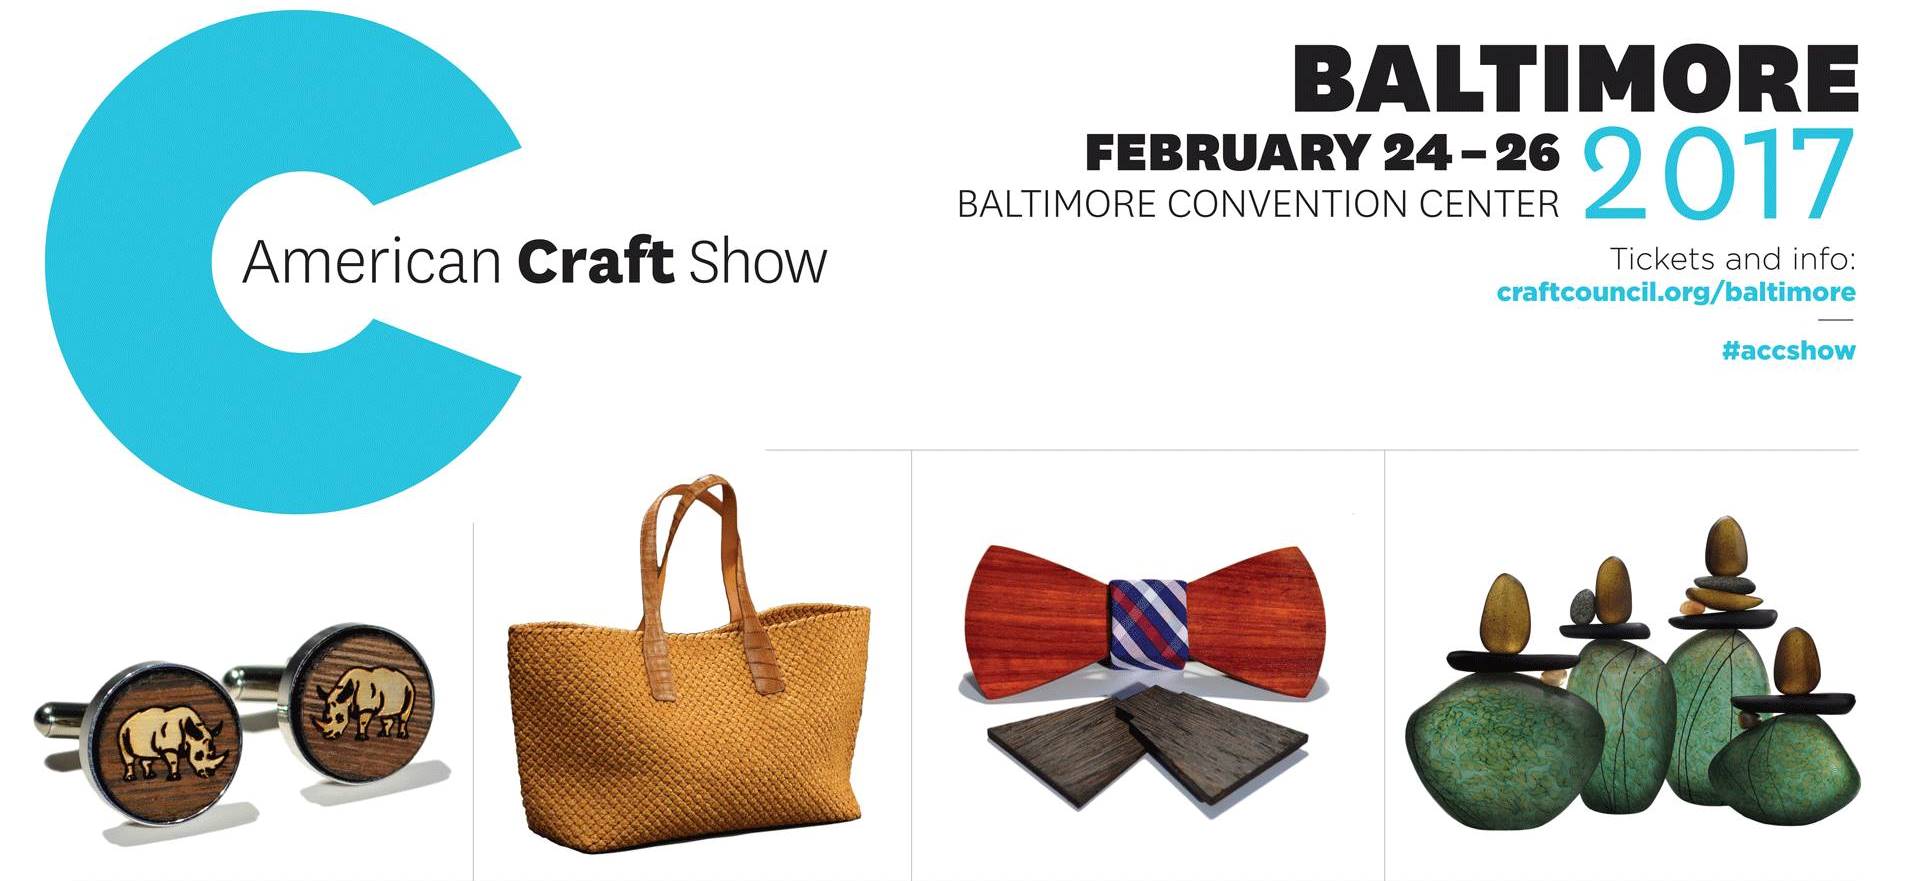 American Craft Council Baltimore Show 2017 Opens This Week